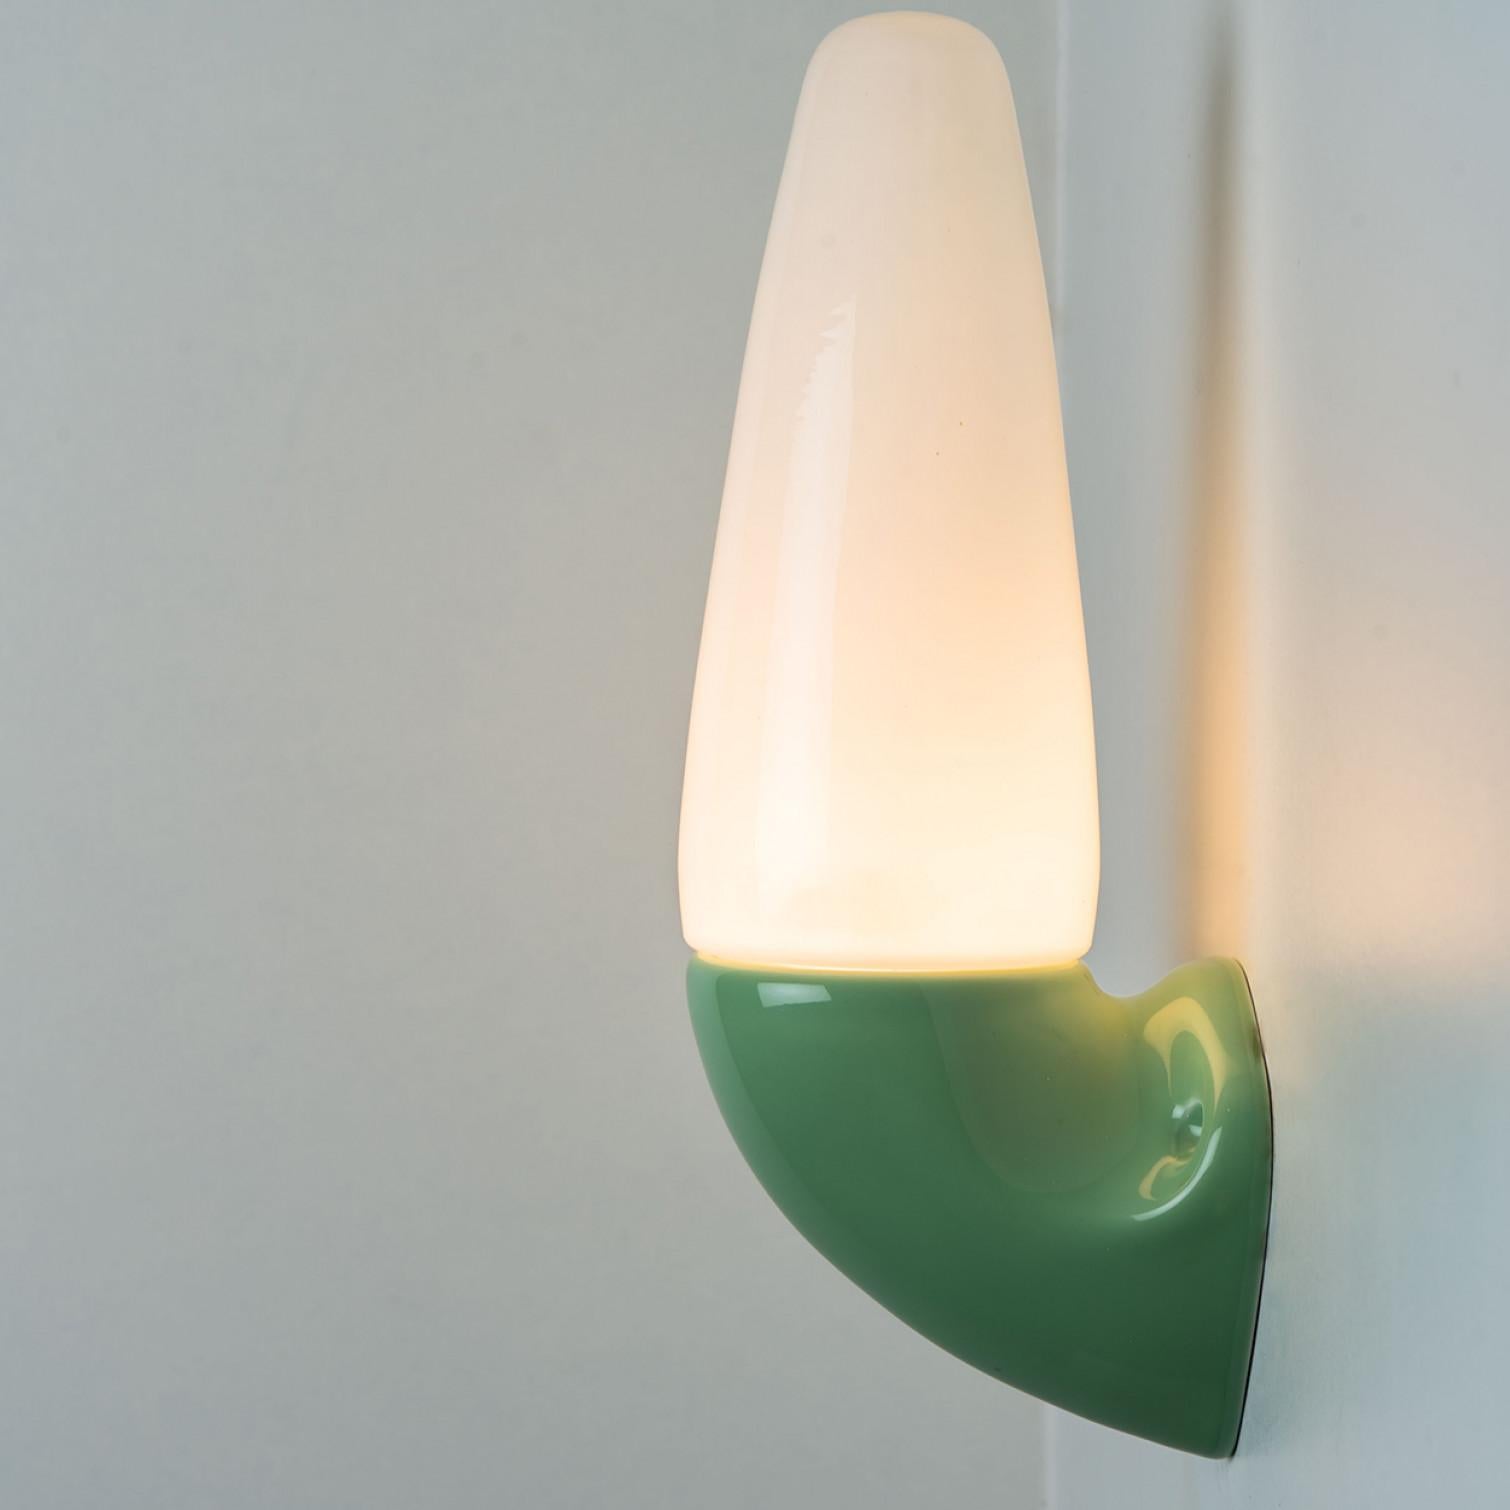 Pair of Green Ceramic Wall Lights, Sigvard Bernadotte, 1970 In Good Condition For Sale In Rijssen, NL